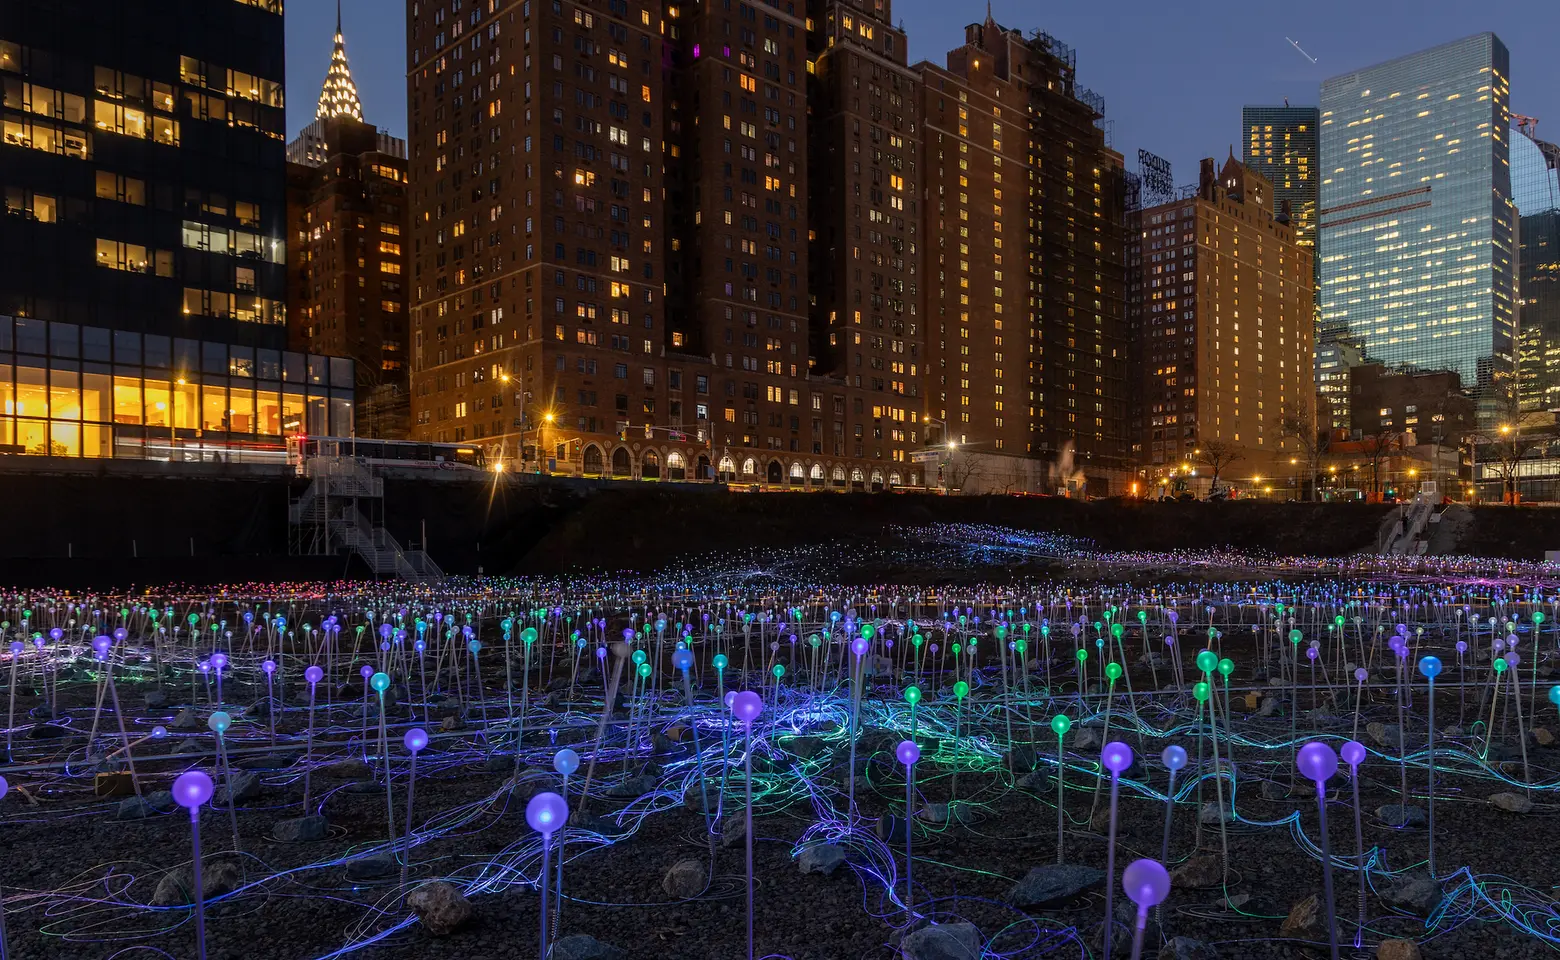 Free six-acre light installation ‘Field of Light’ opens in Midtown East